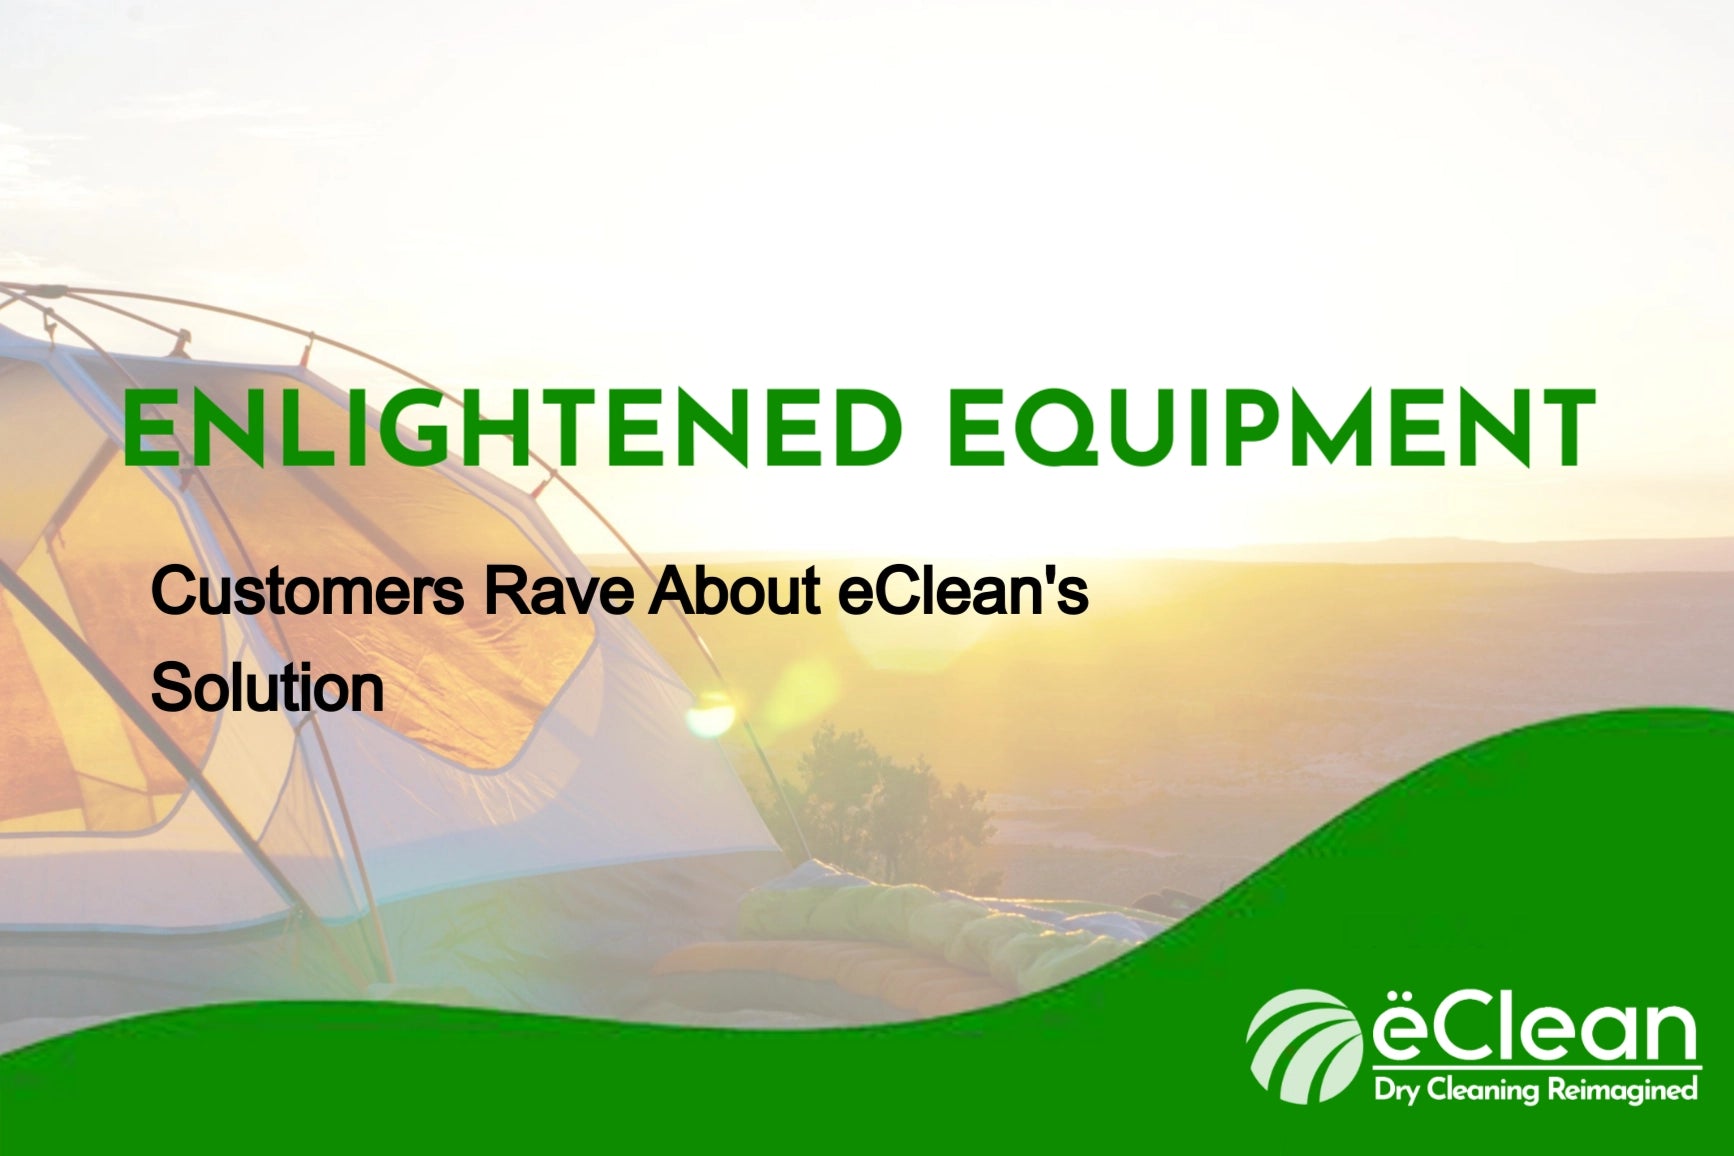 Enlightened Equipment Customers Rave About eClean's Solution